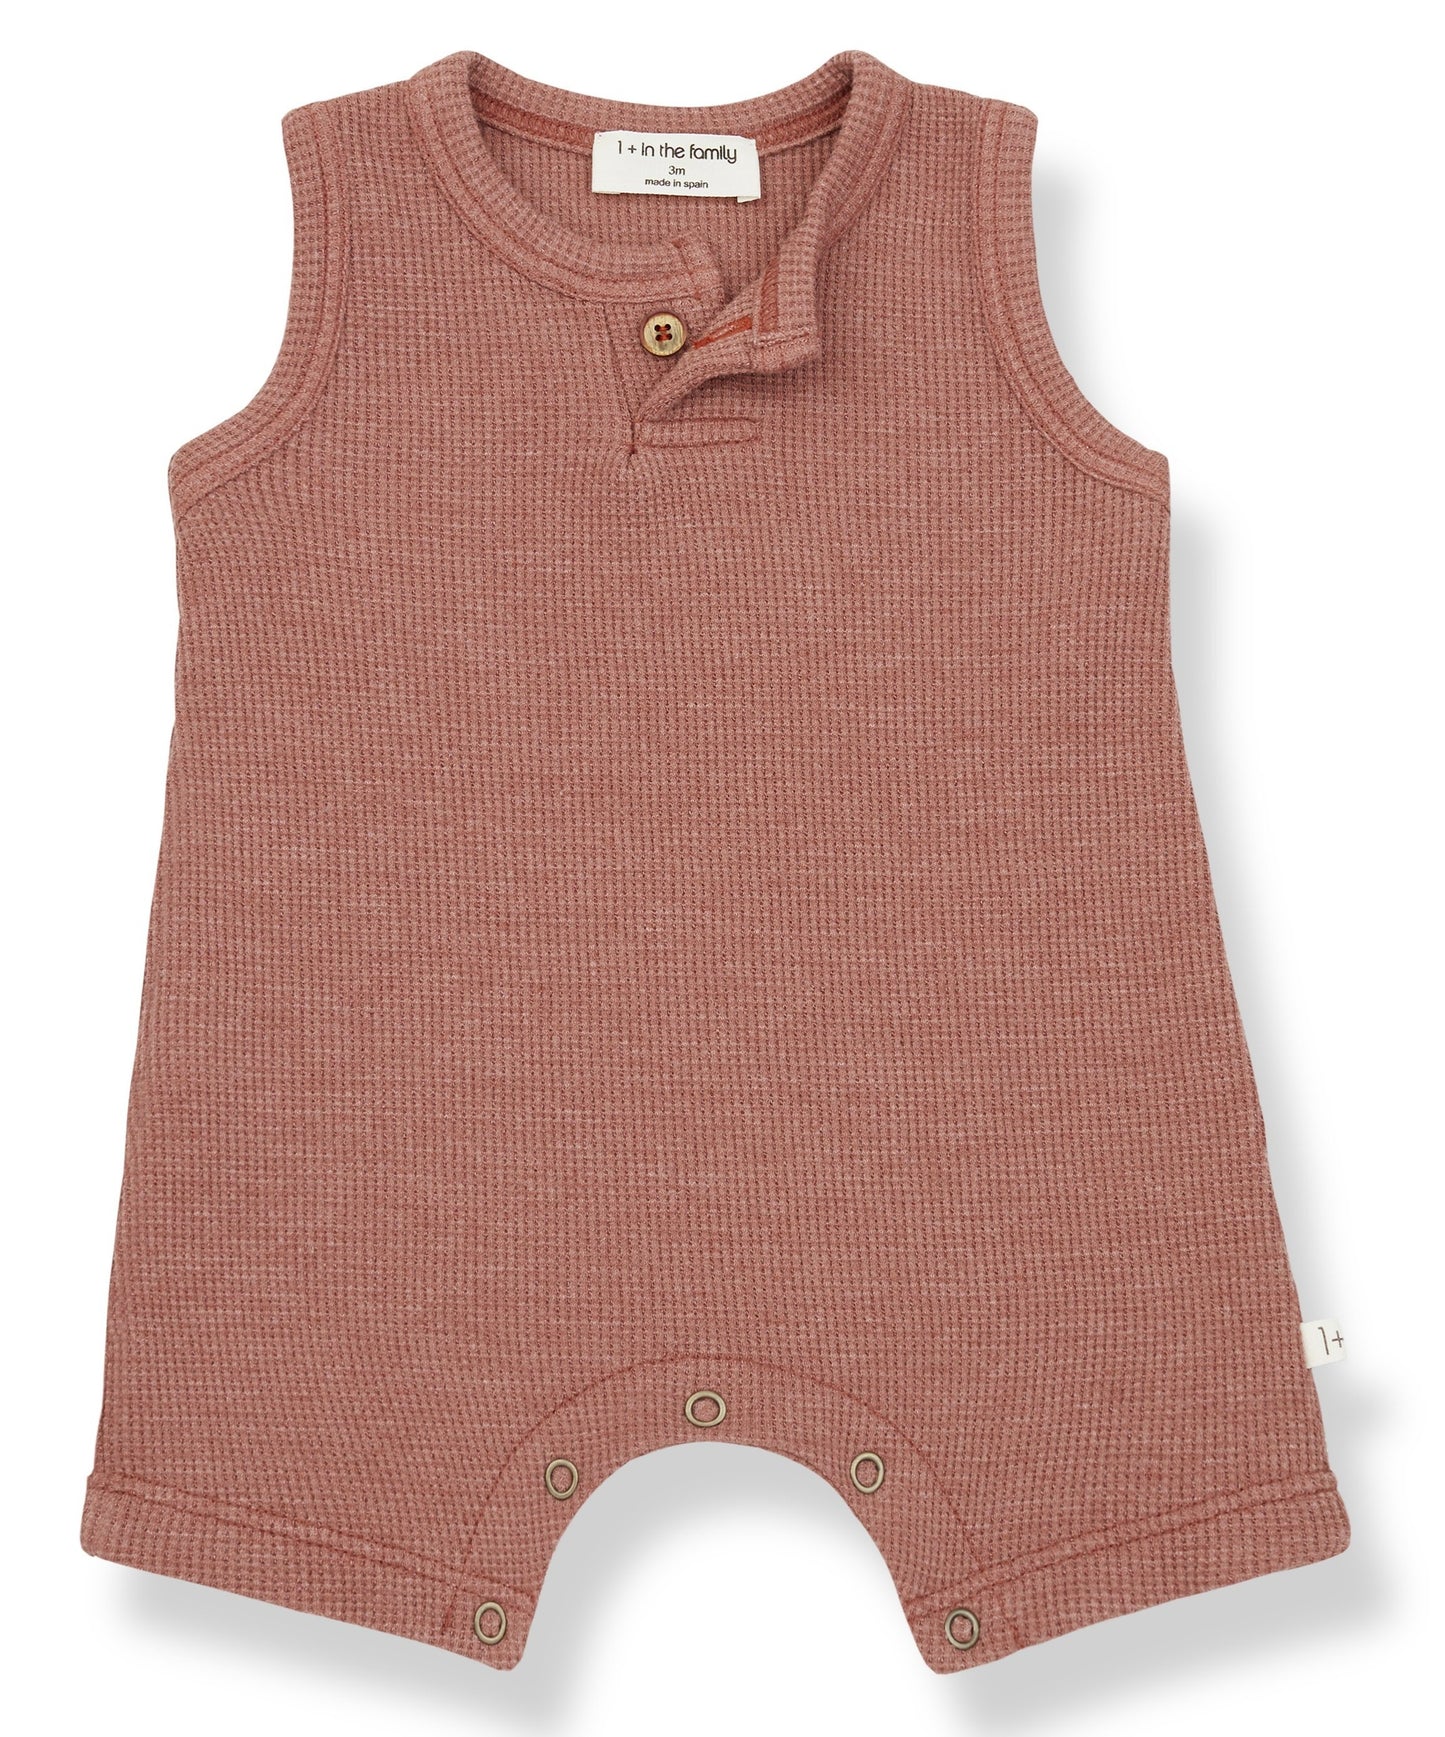 One + In the Family August Romper